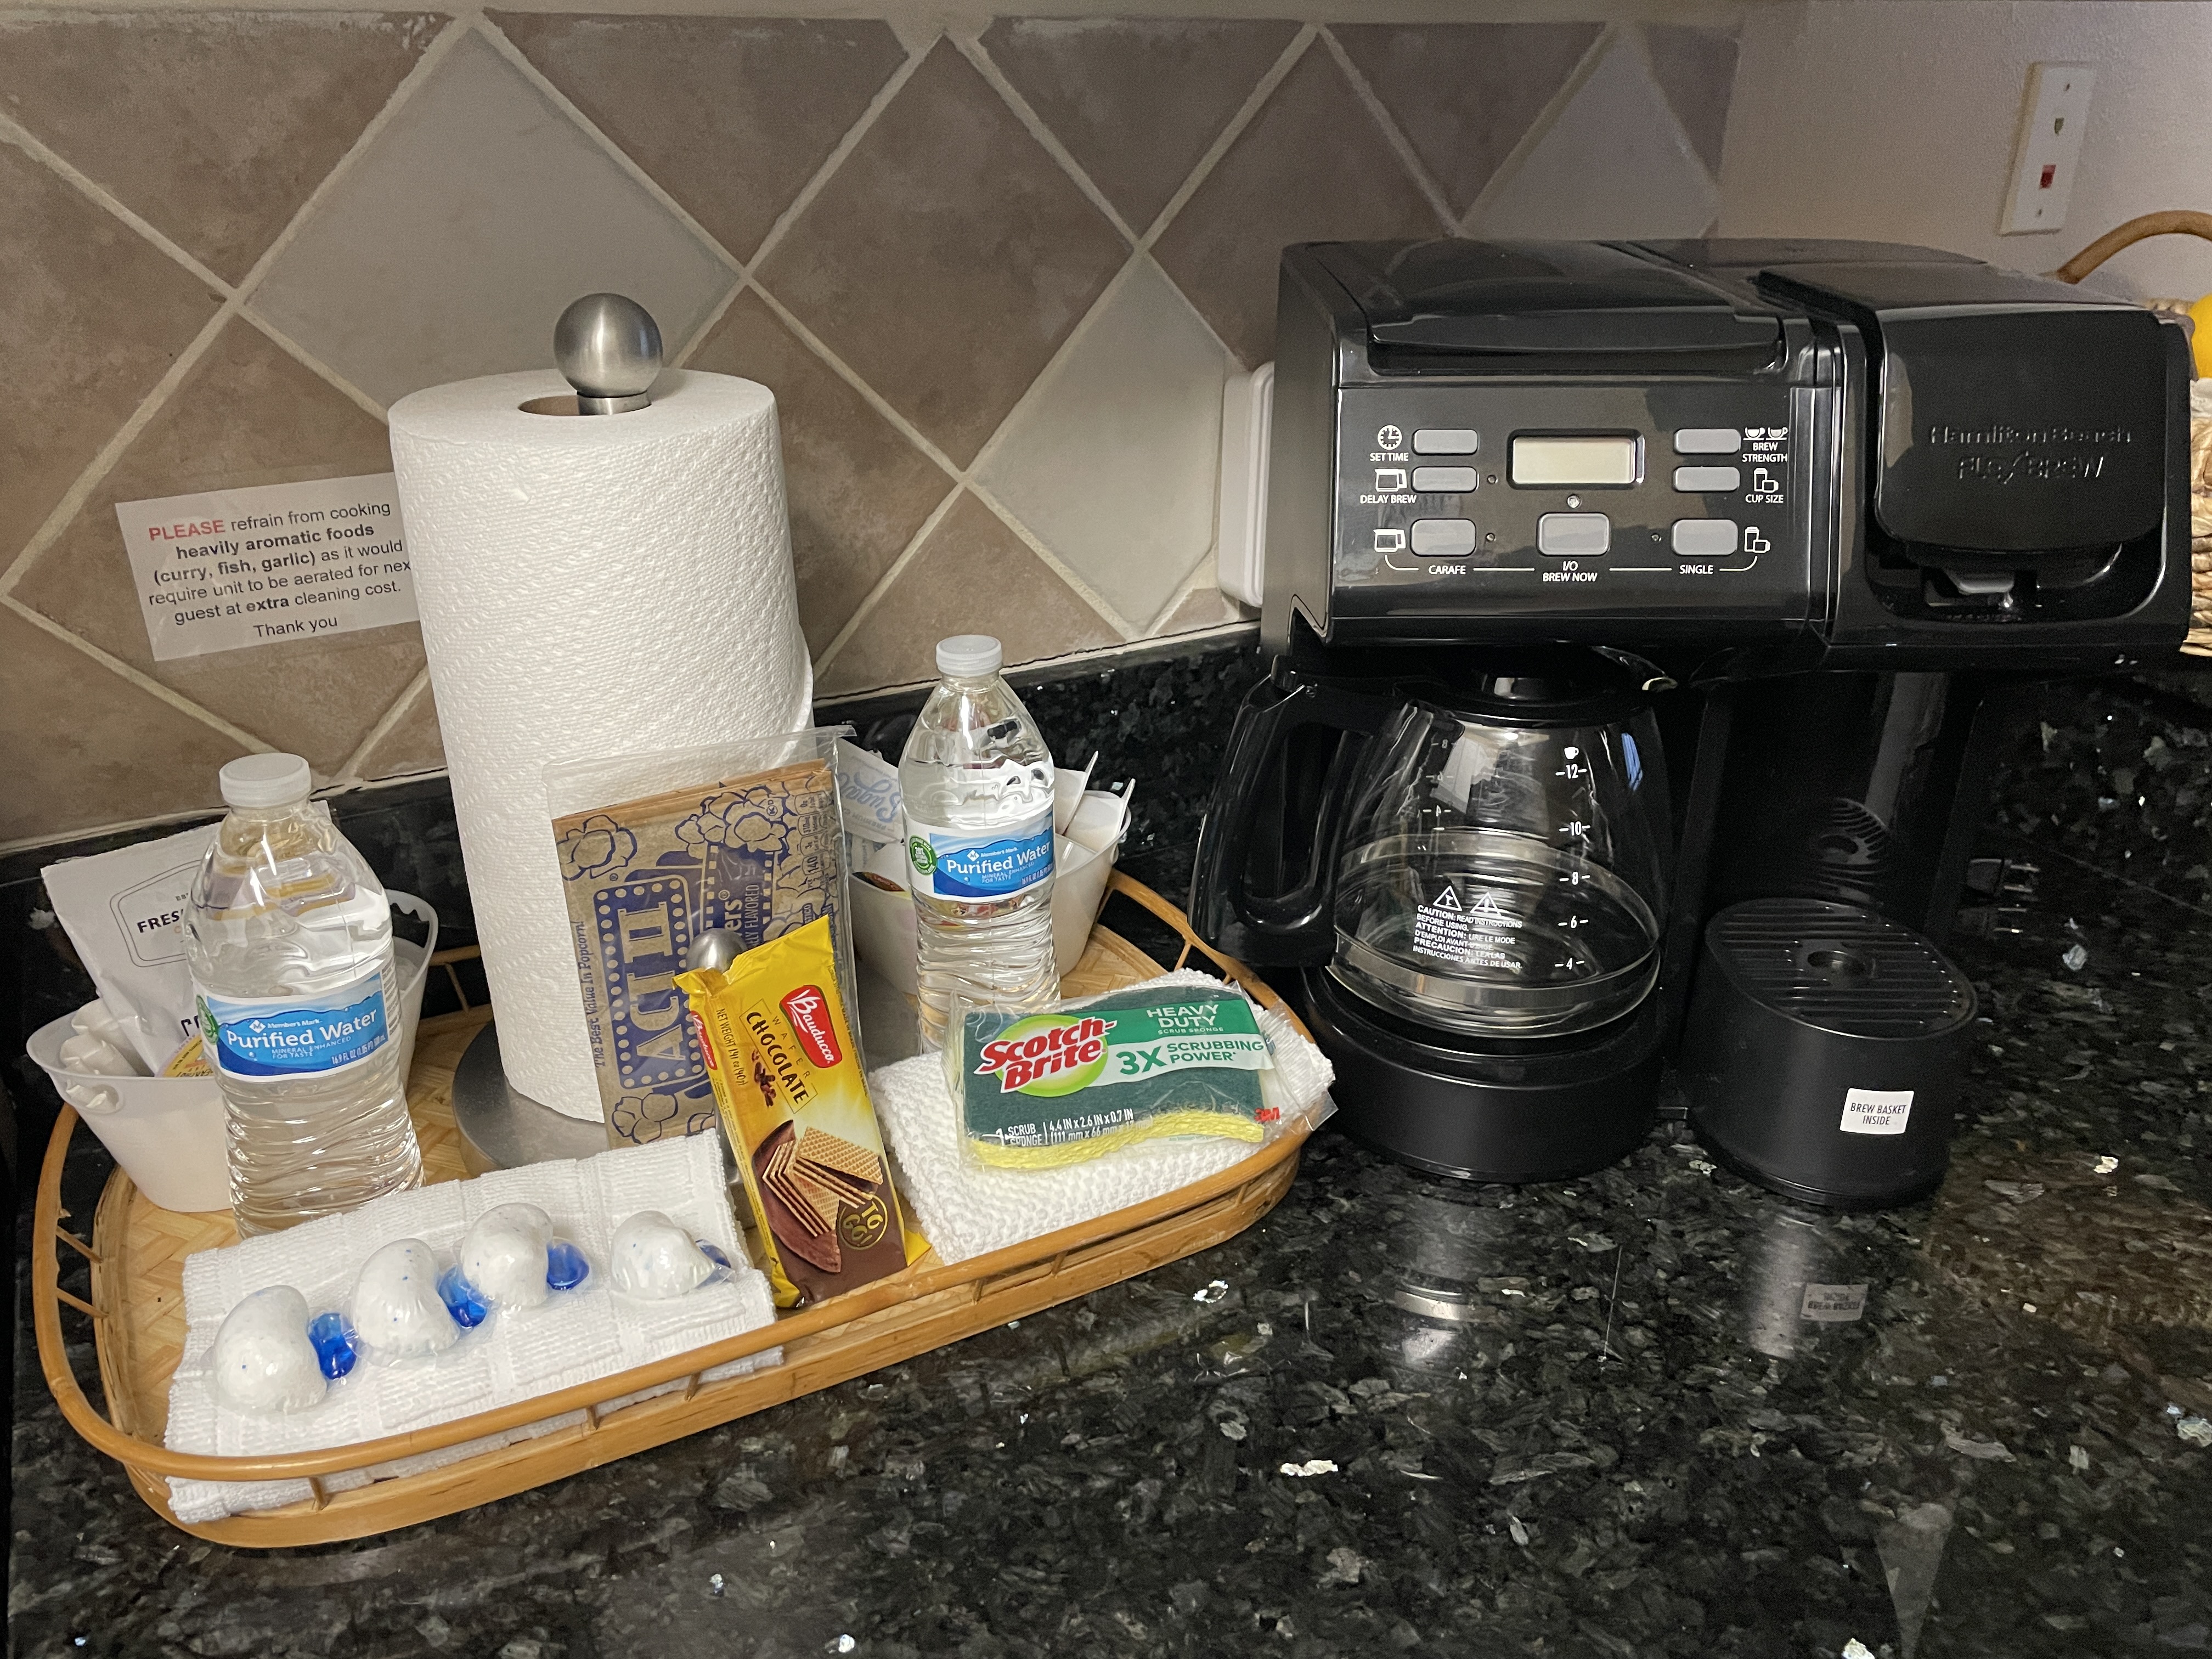 Dual coffee maker and initial supplies